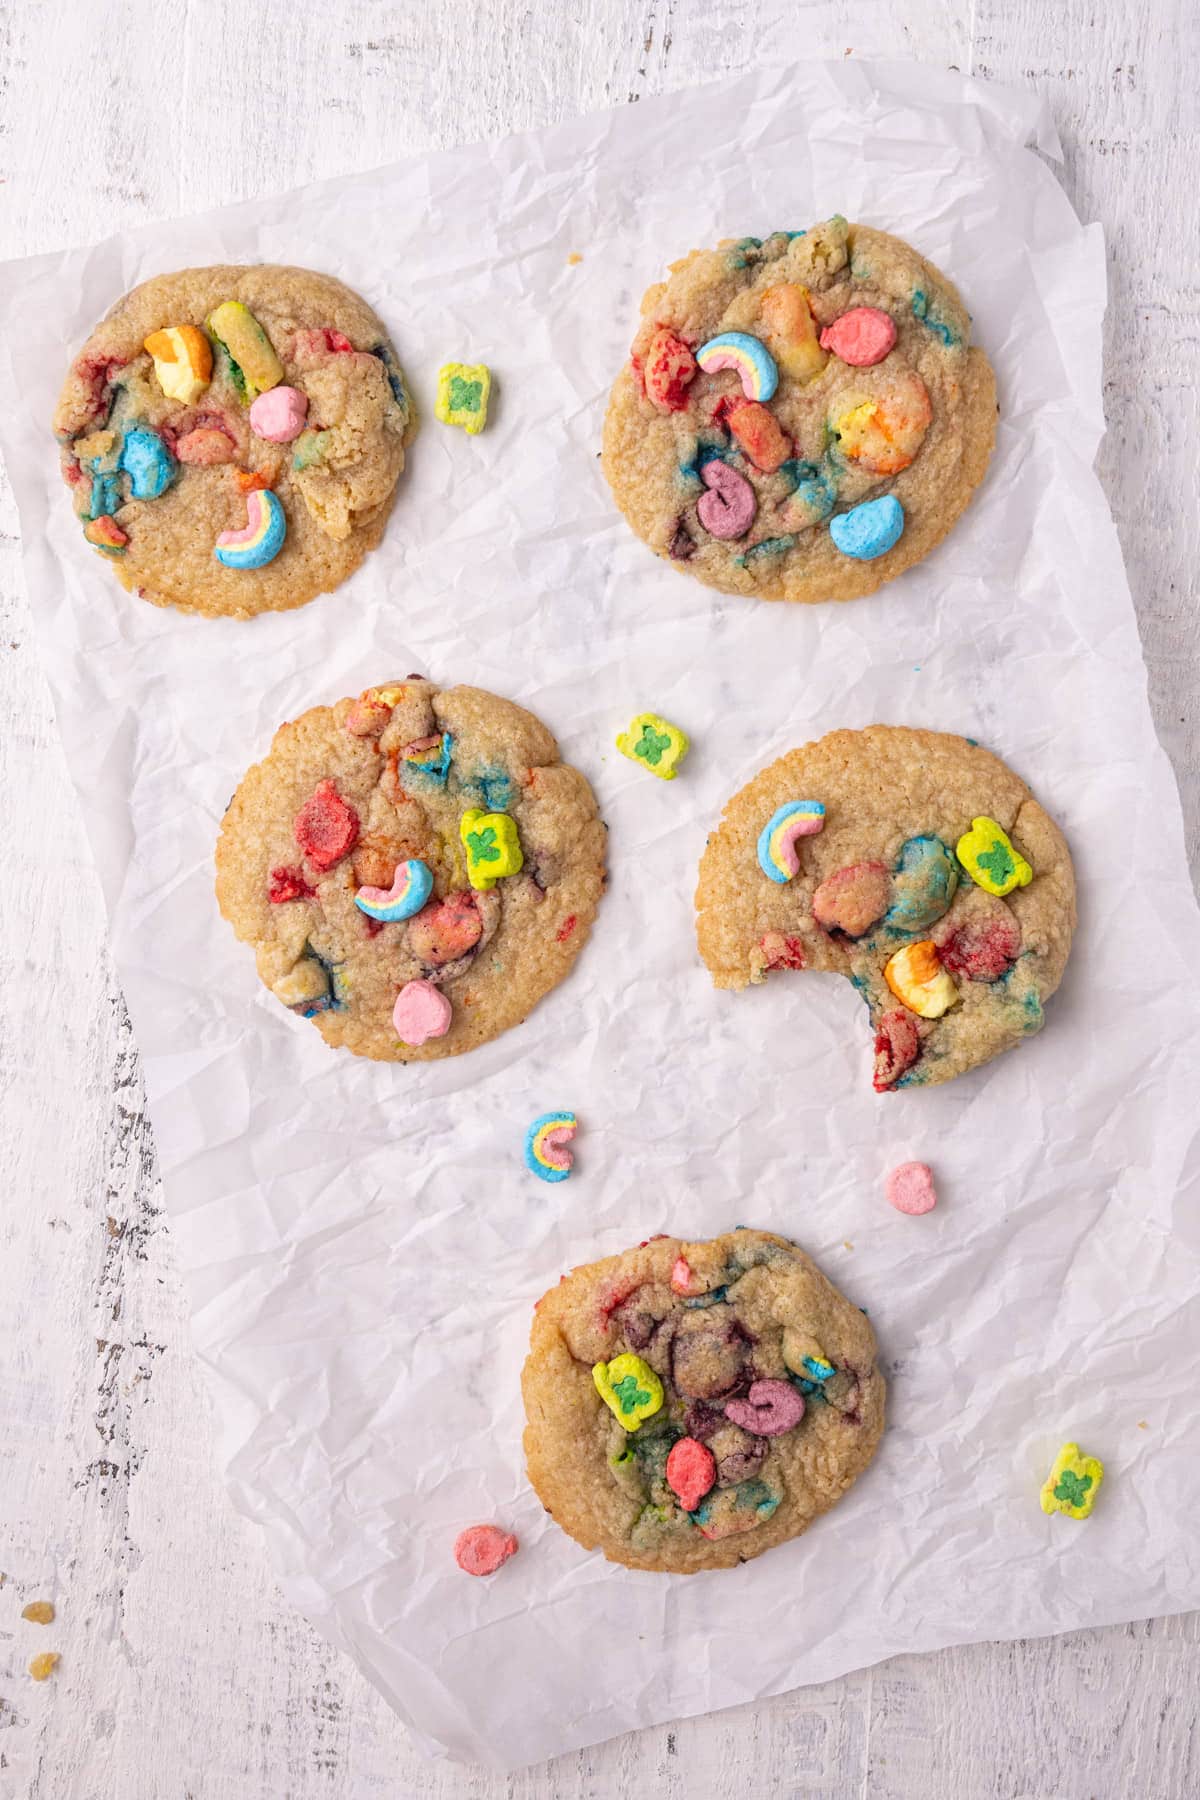 Six just-baked Lucky Charms cookies, one with a bite taken out. 